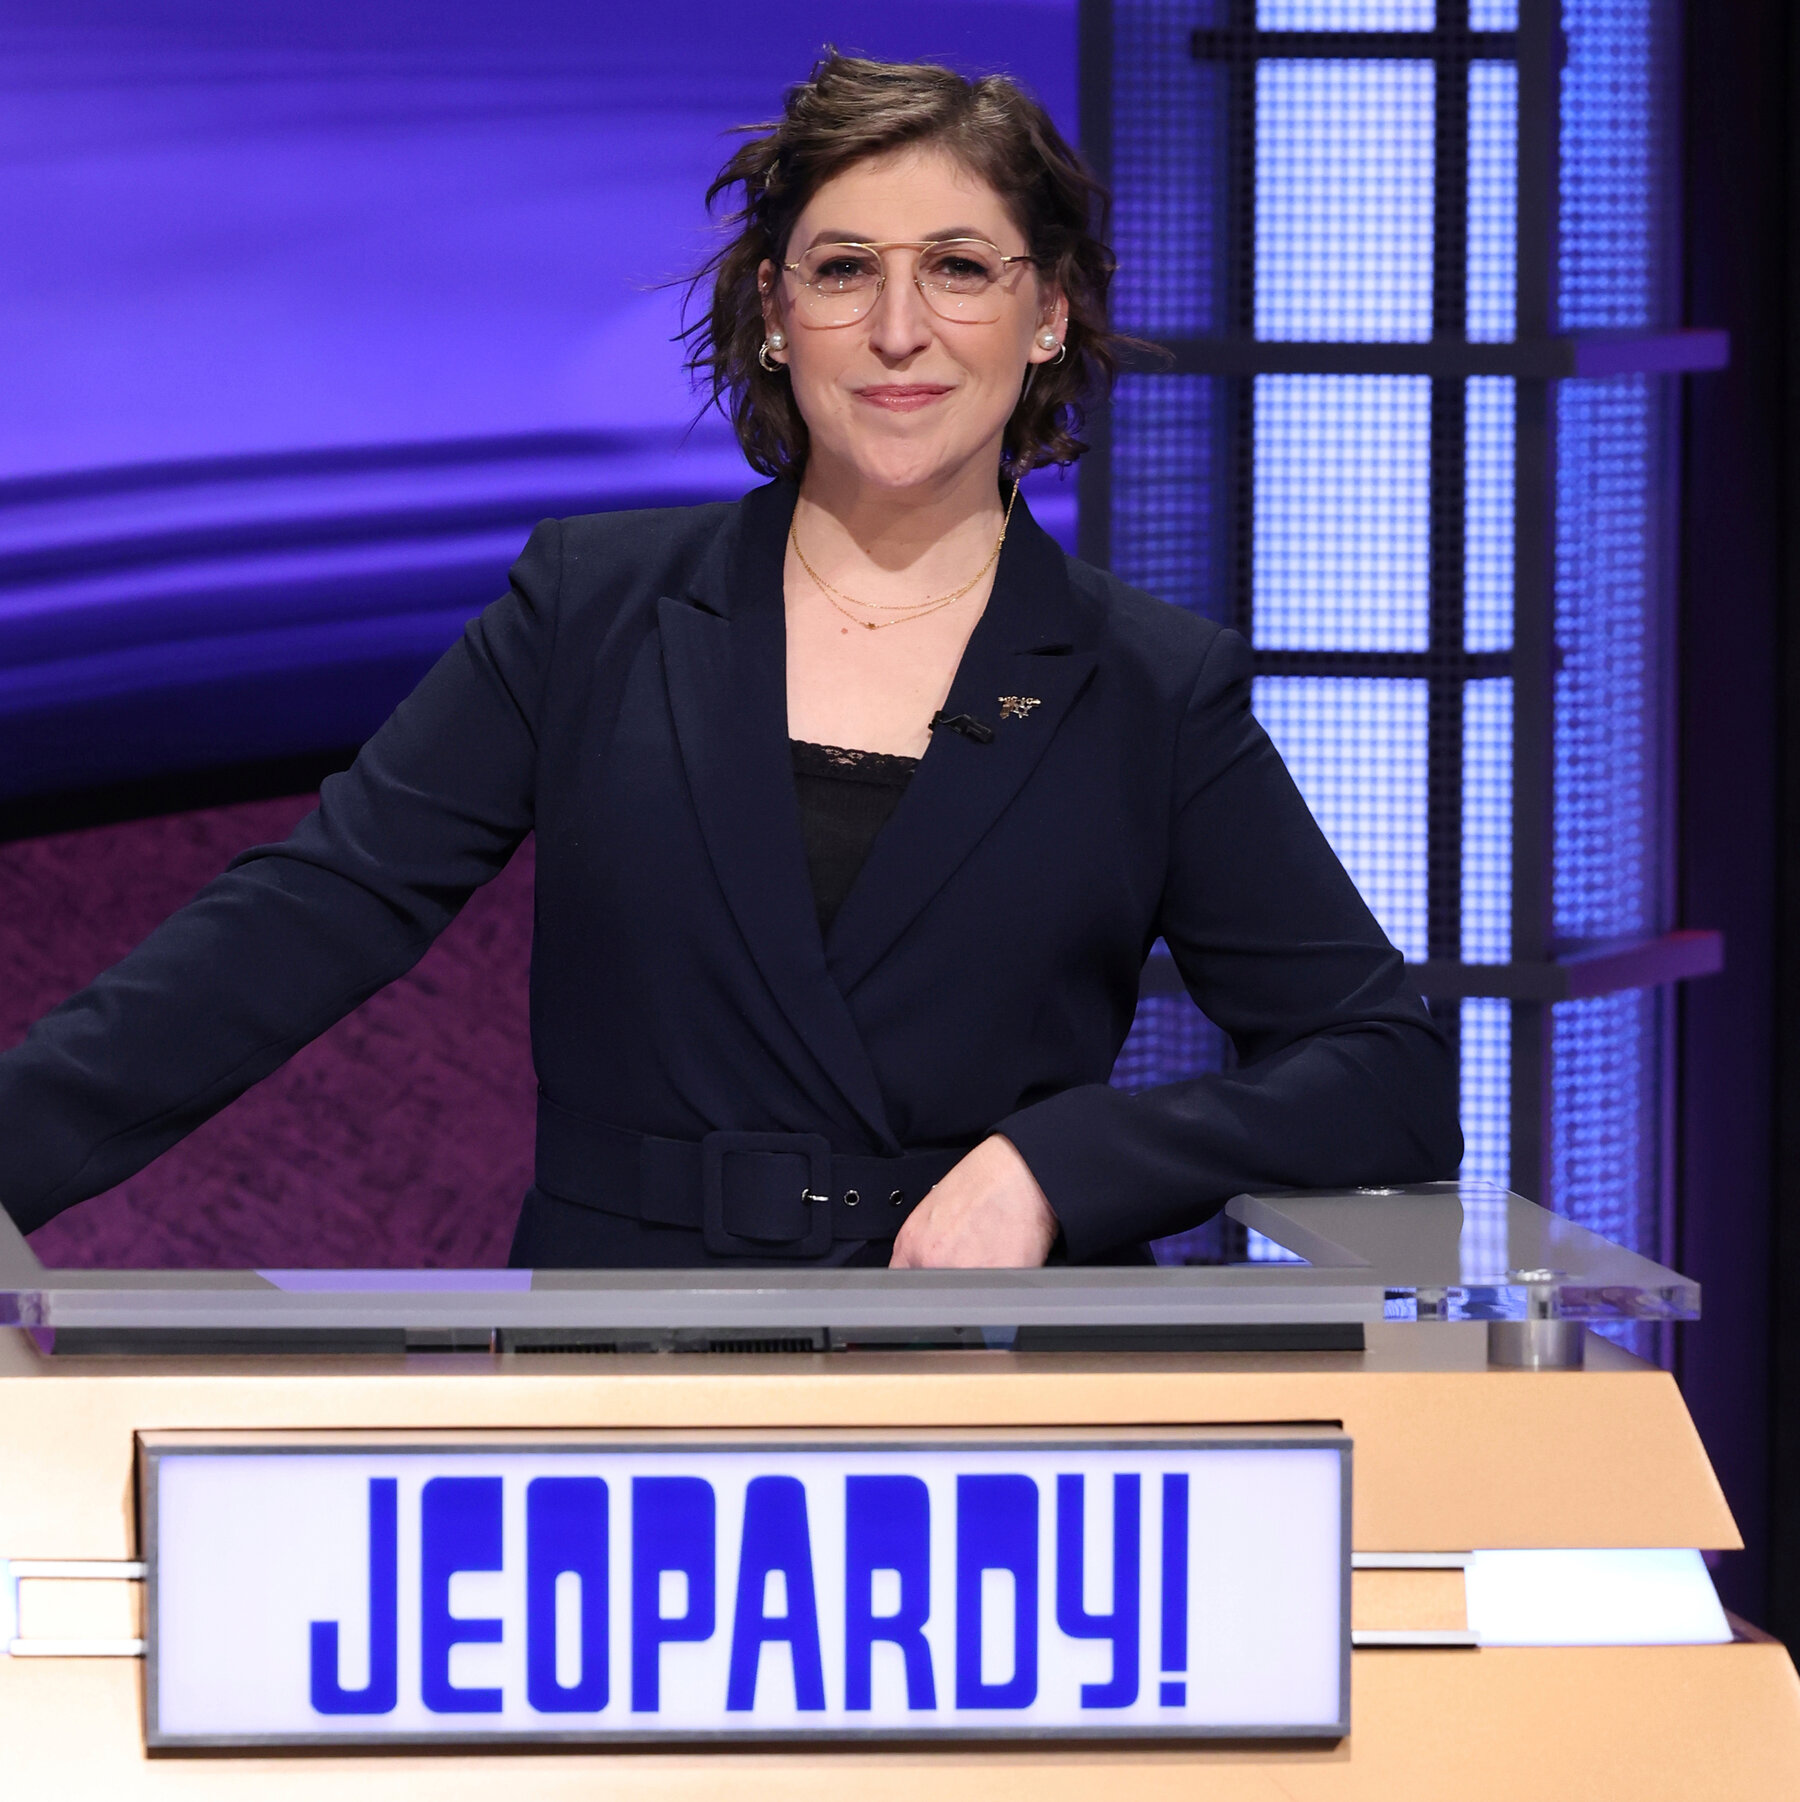 Jeopardy! A Cultural Icon in American Television